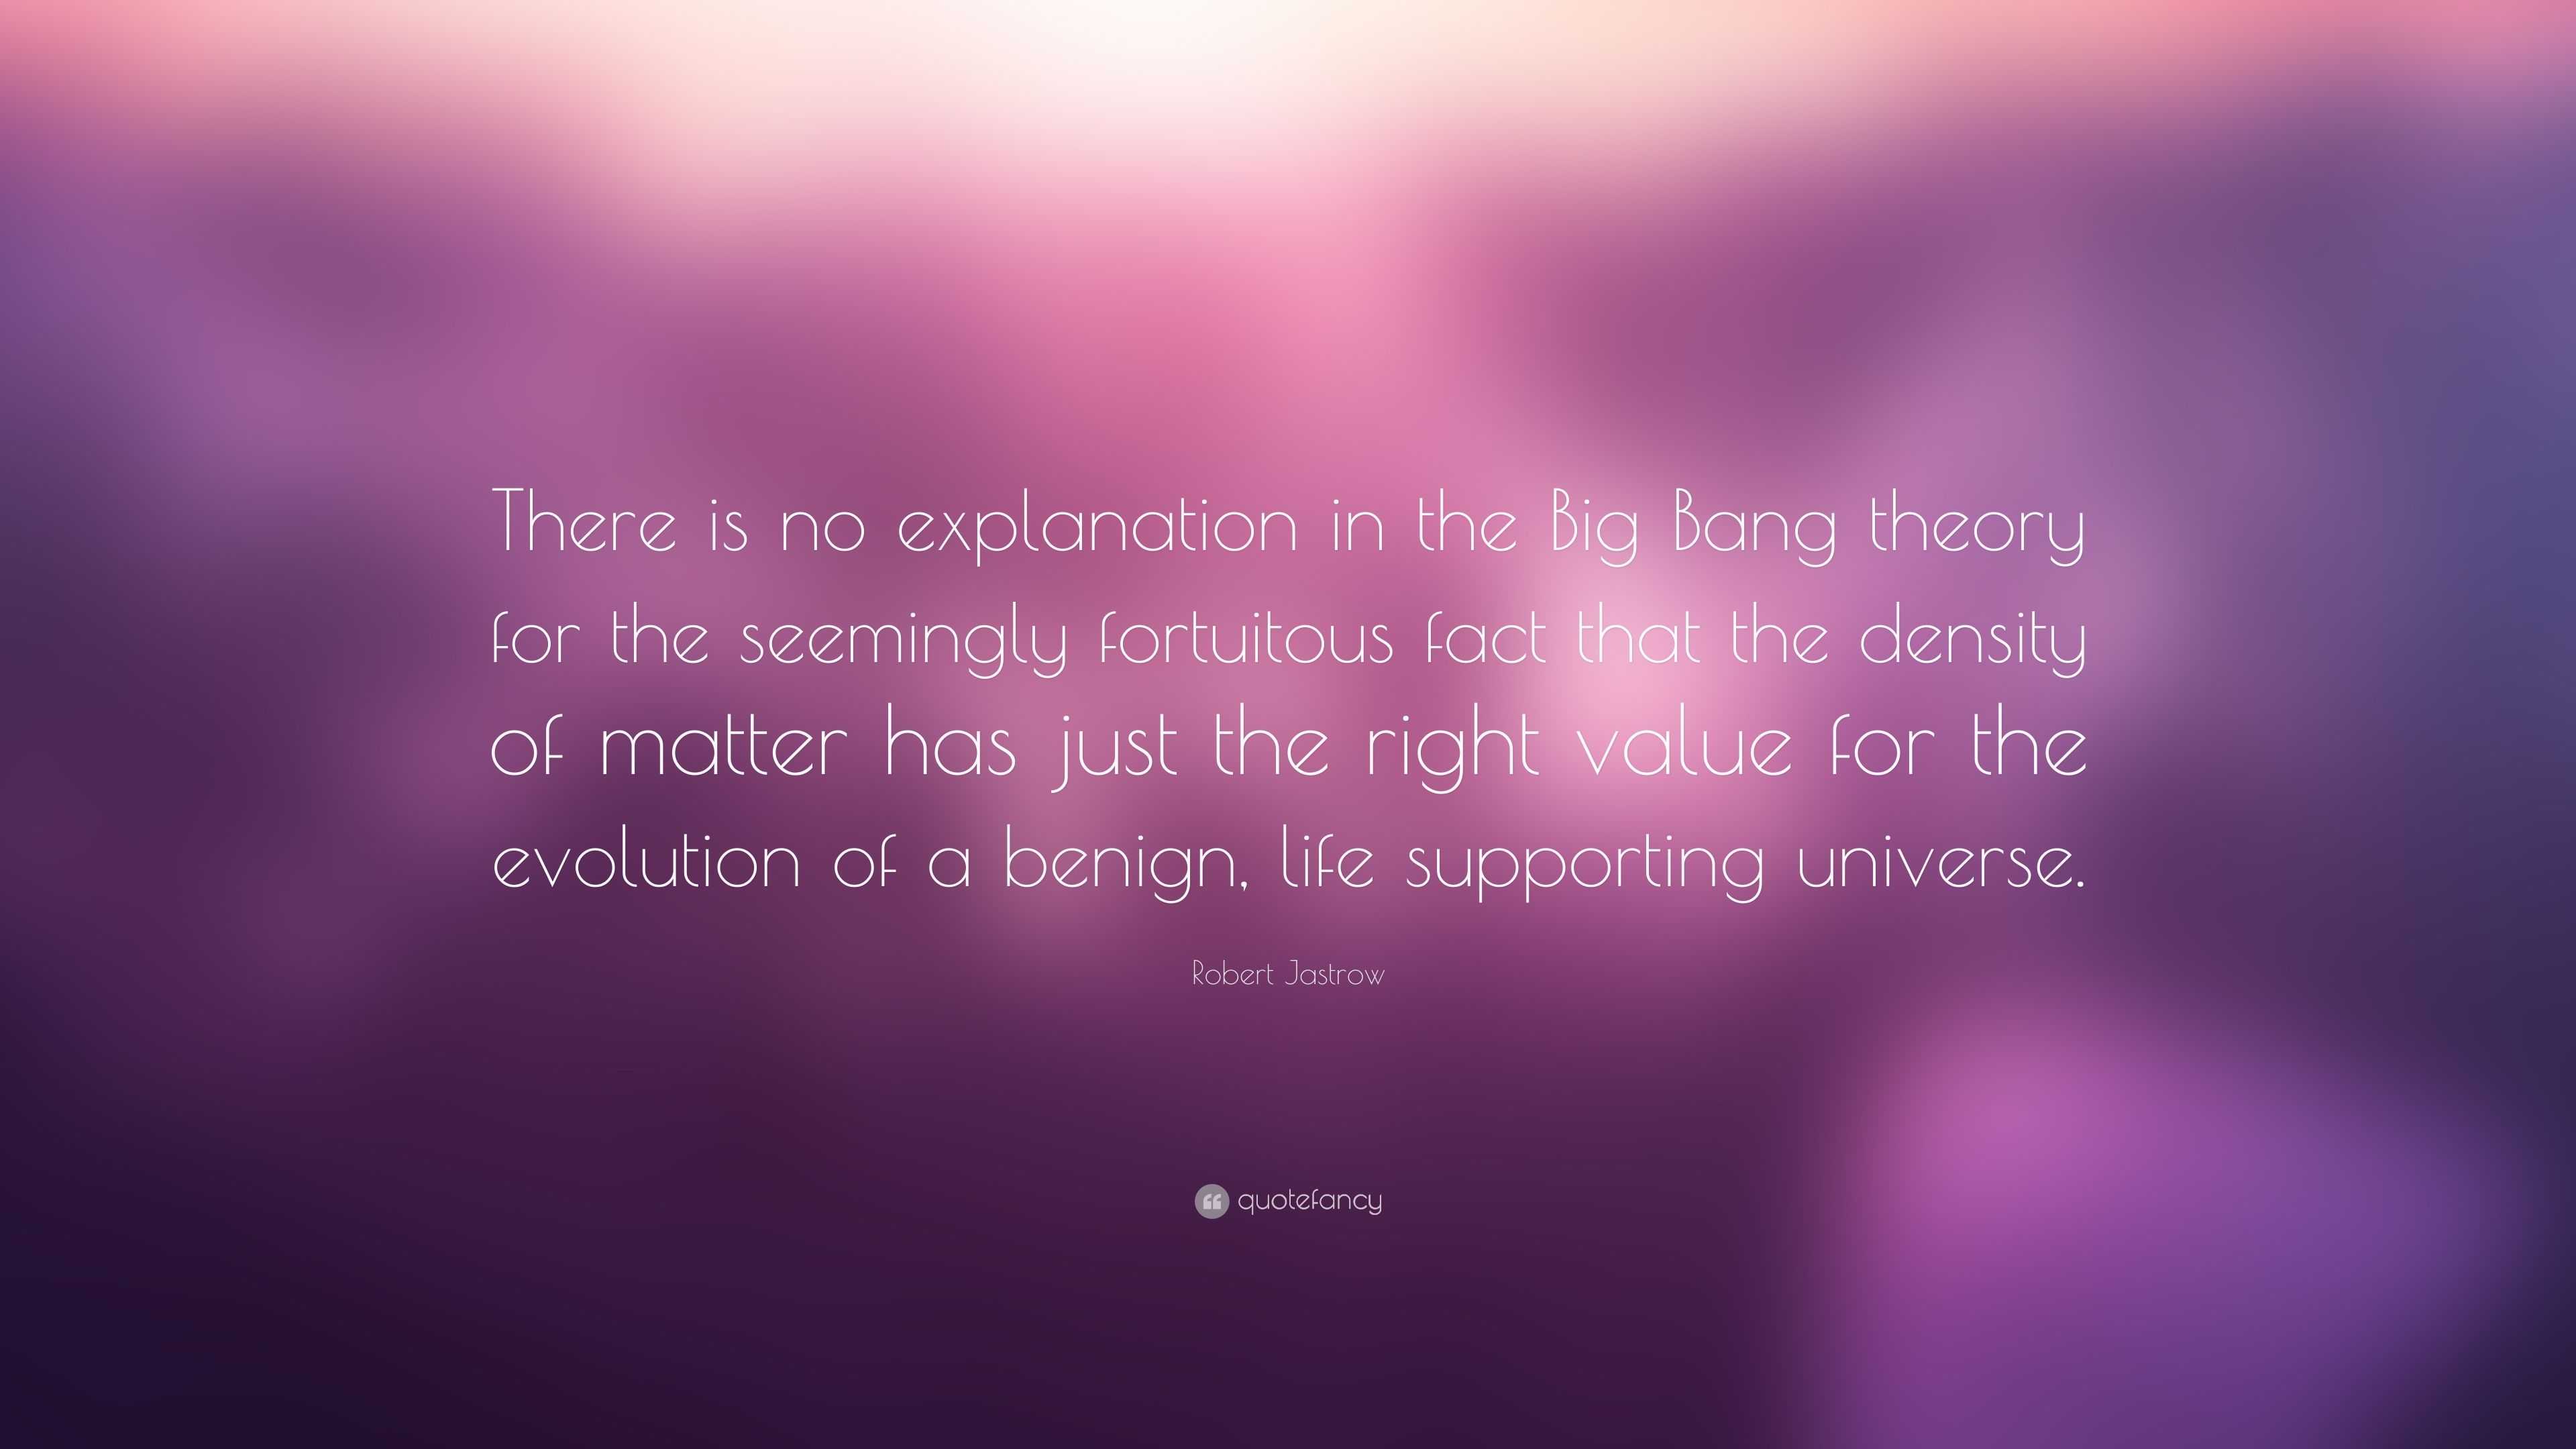 Robert Jastrow Quote: “There is no explanation in the Big Bang theory ...